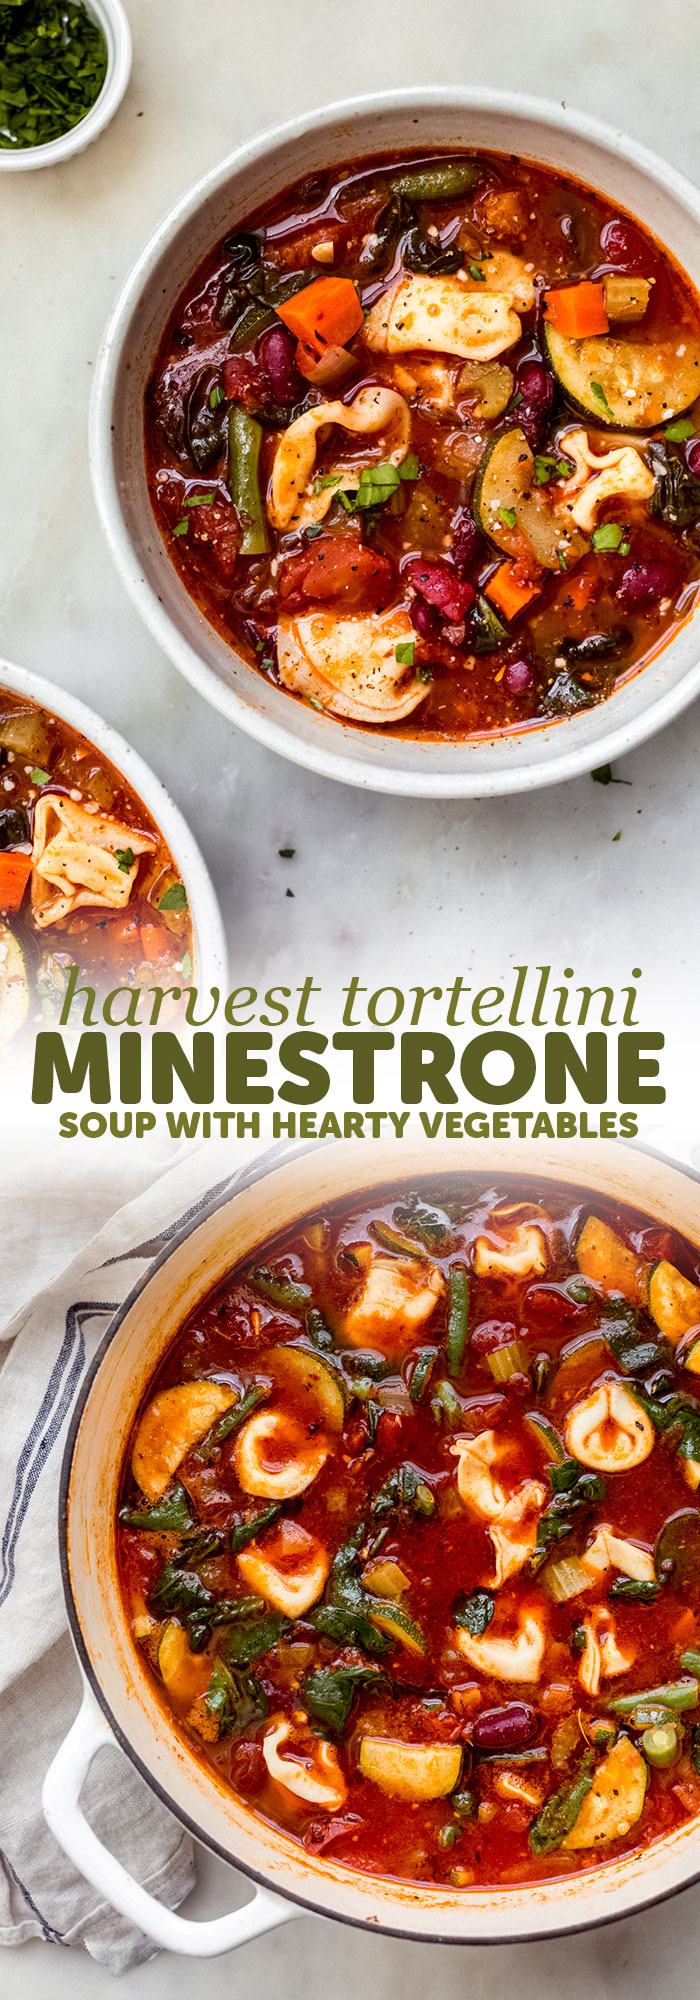 Fire-roasted Tortellini Minestrone Soup - a quick and hearty take on the traditional minestrone. Mine is a stove-top version that uses tortellini instead of pasta. Great for boxed lunches or as a starter to dinner guests! #minestronesoup #tortellini #tortelliniminestrone #minstrone #vegetablesoup | Littlespicejar.com